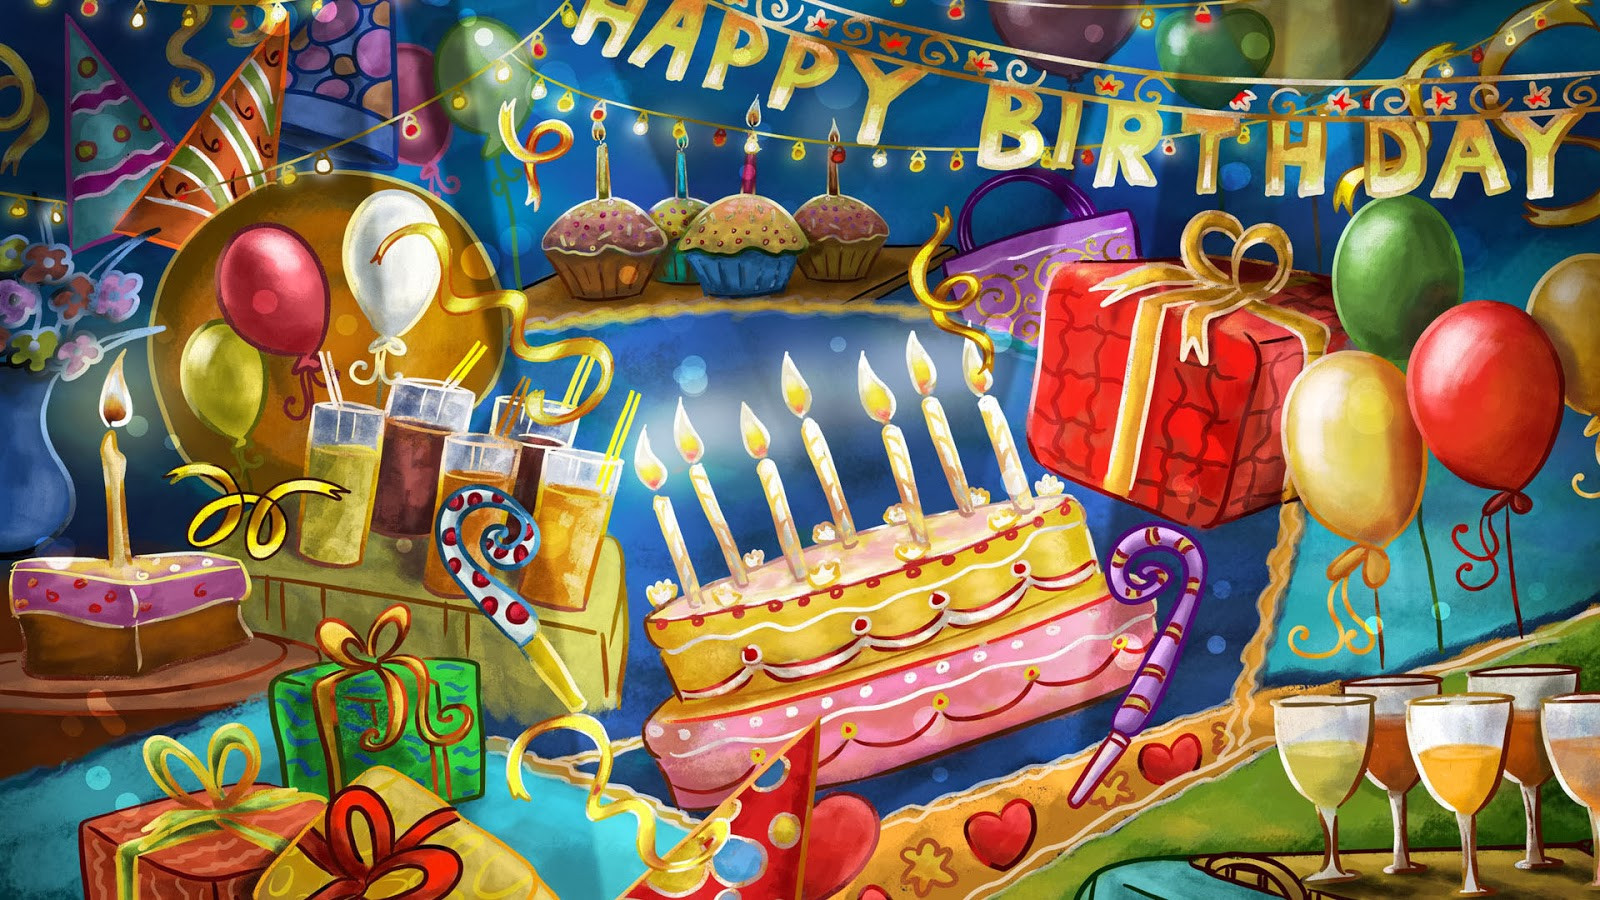 Happy Birthday Wishes Images Free Download
 Lovable Happy Birthday Greetings free